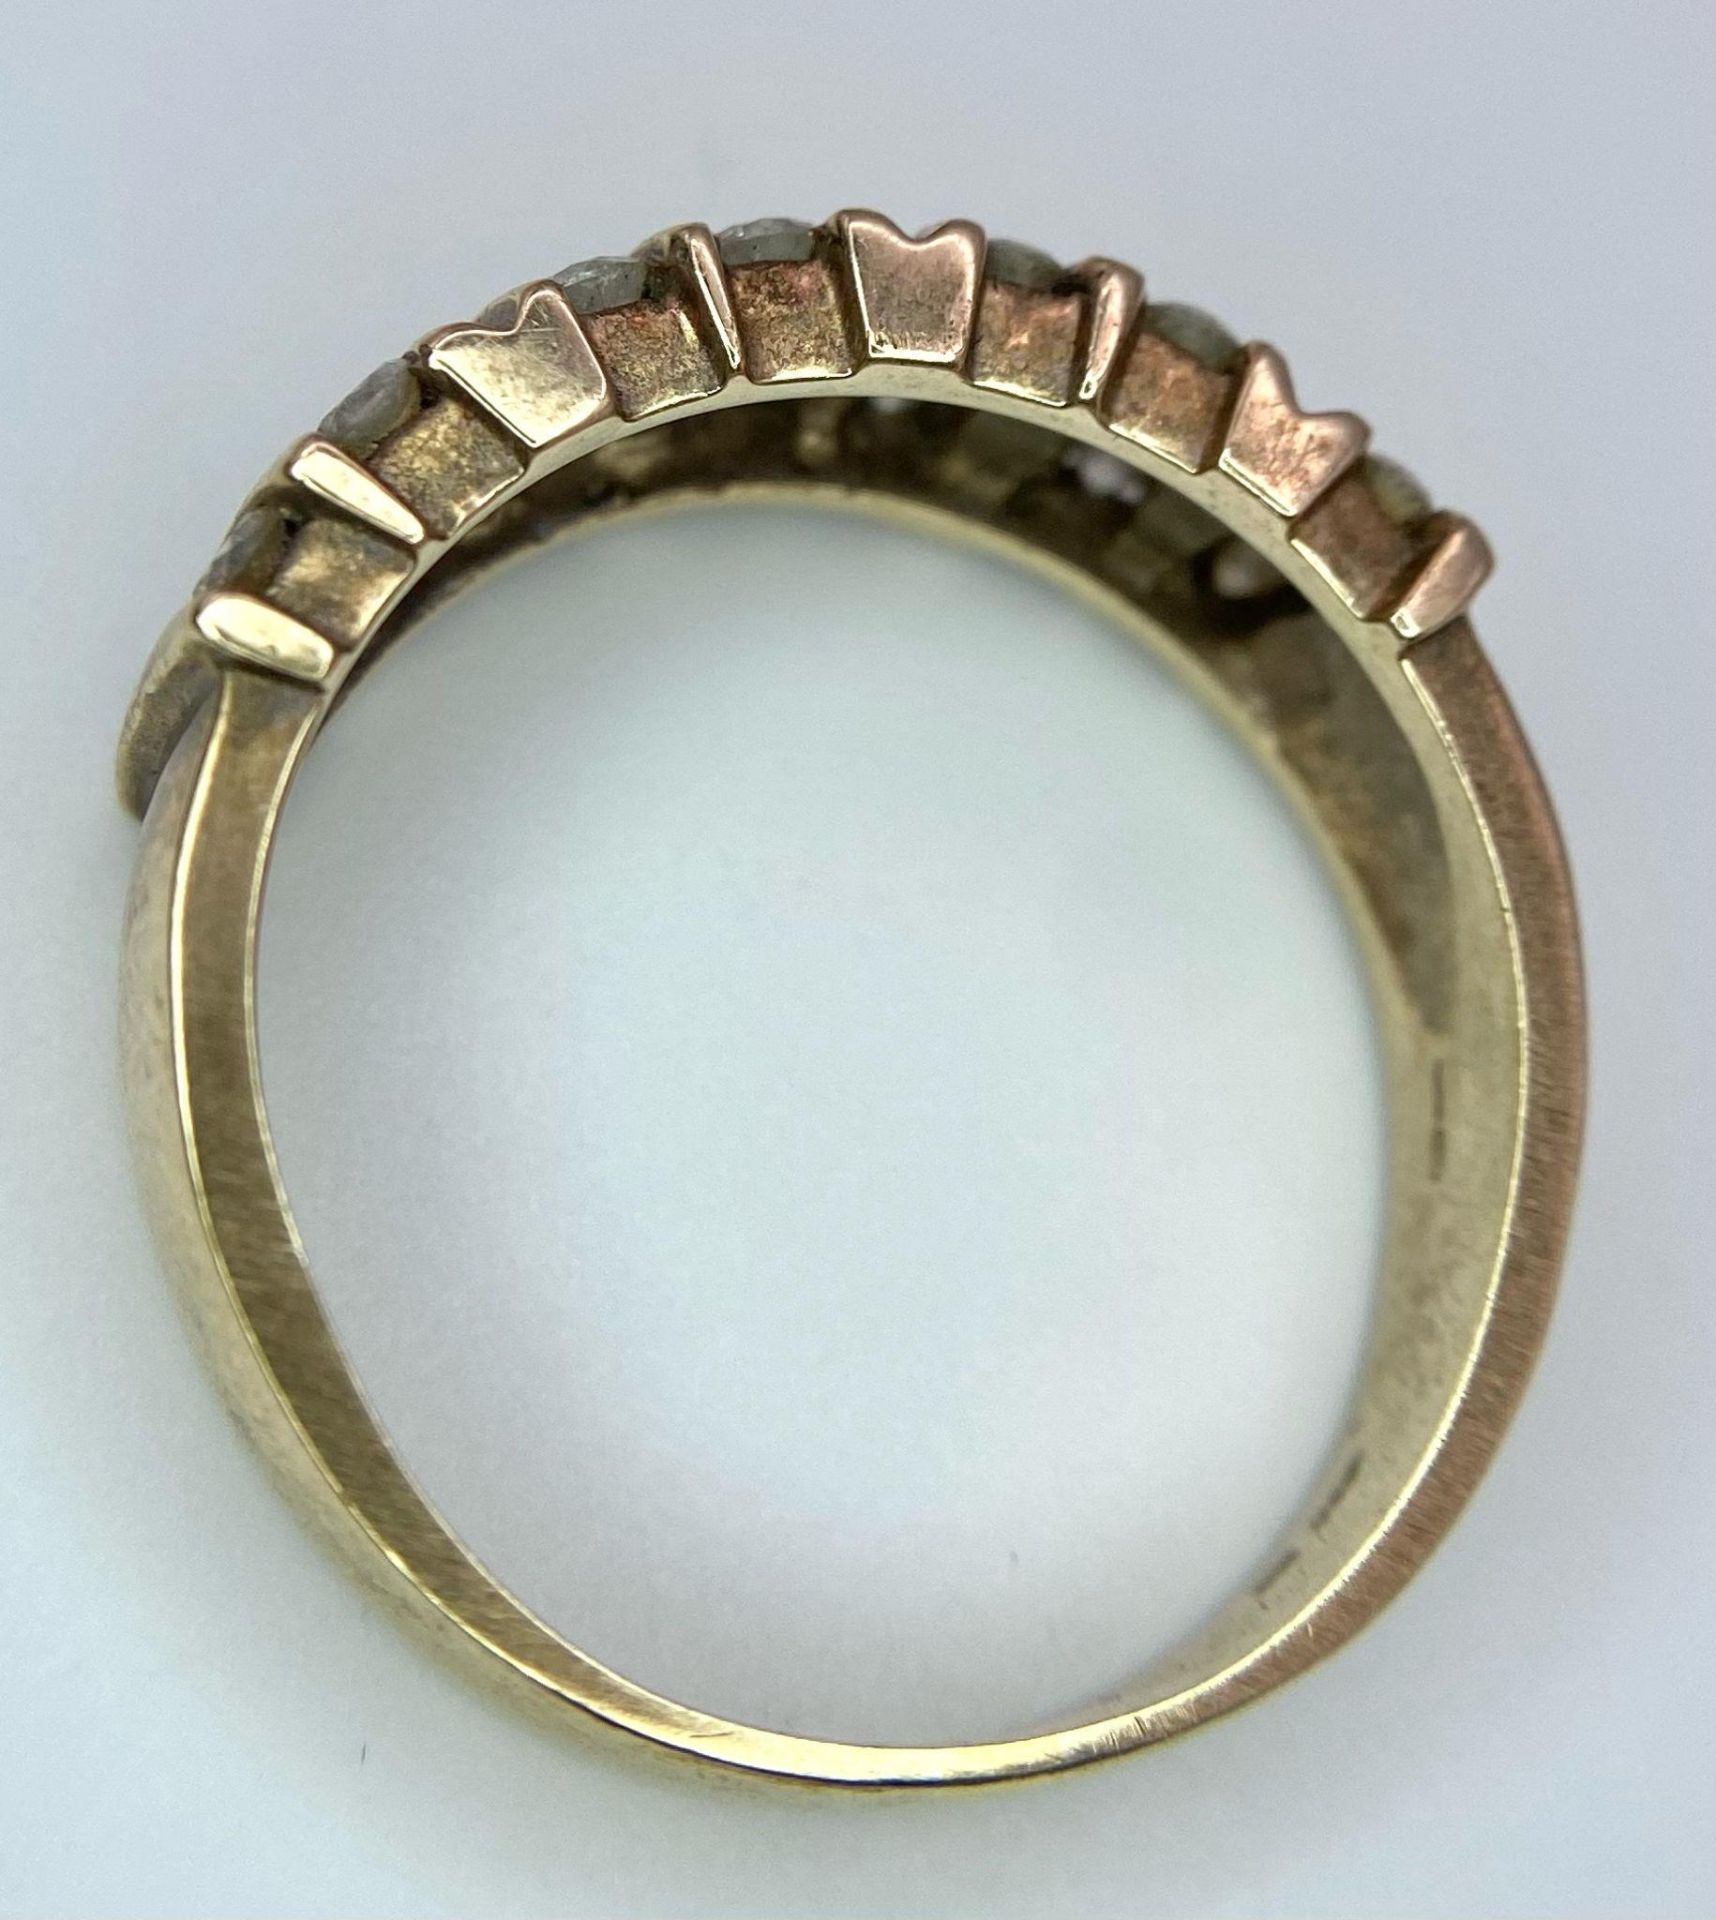 A Vintage 9K Yellow Gold 21 Diamond Ring. 1ctw of brilliant round cut diamonds. Size T. 5.9g total - Image 5 of 7